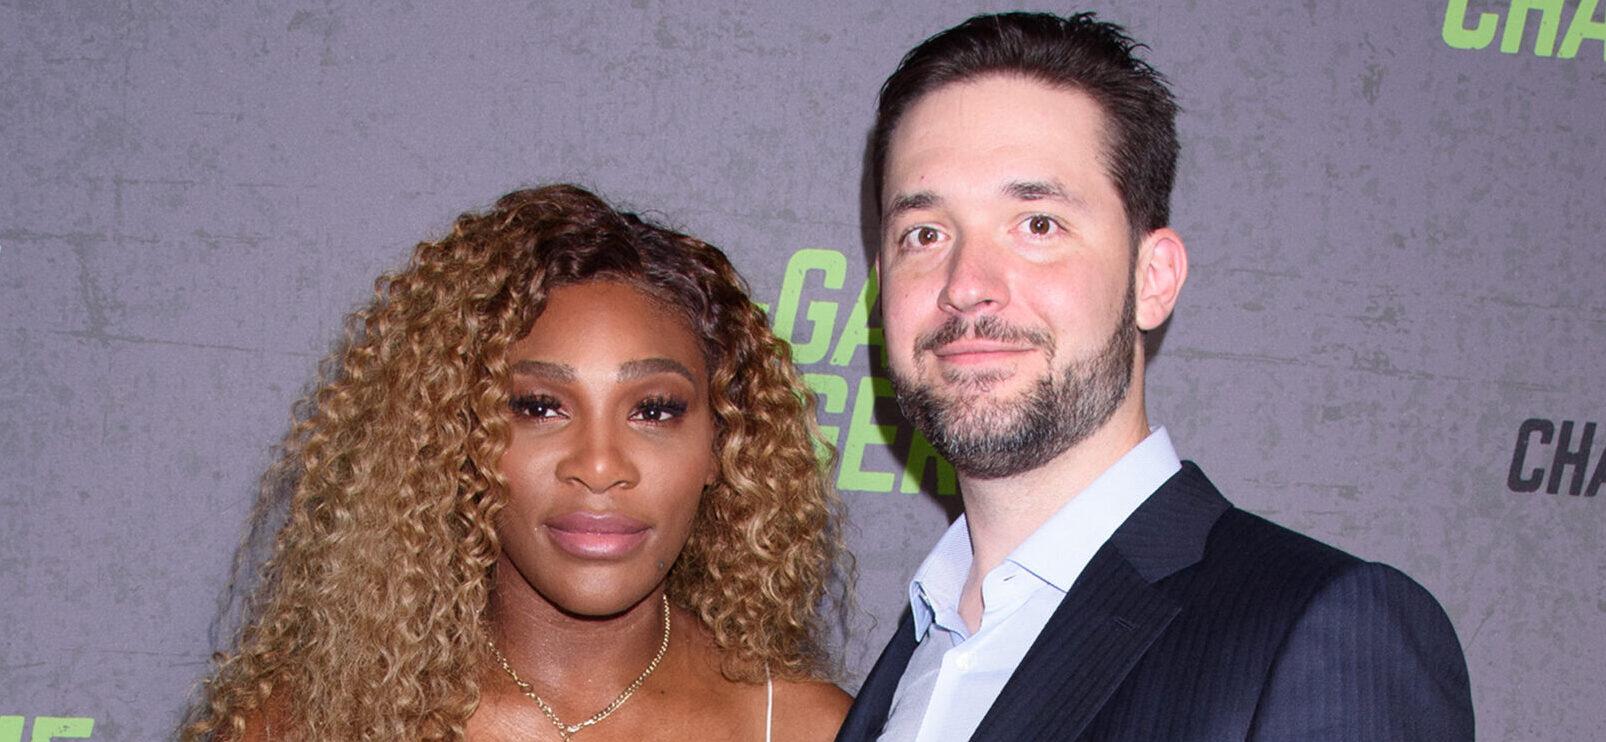 Serena Williams’ Husband Alexis Ohanian Stages Surprise In ‘The Big REVEAL’